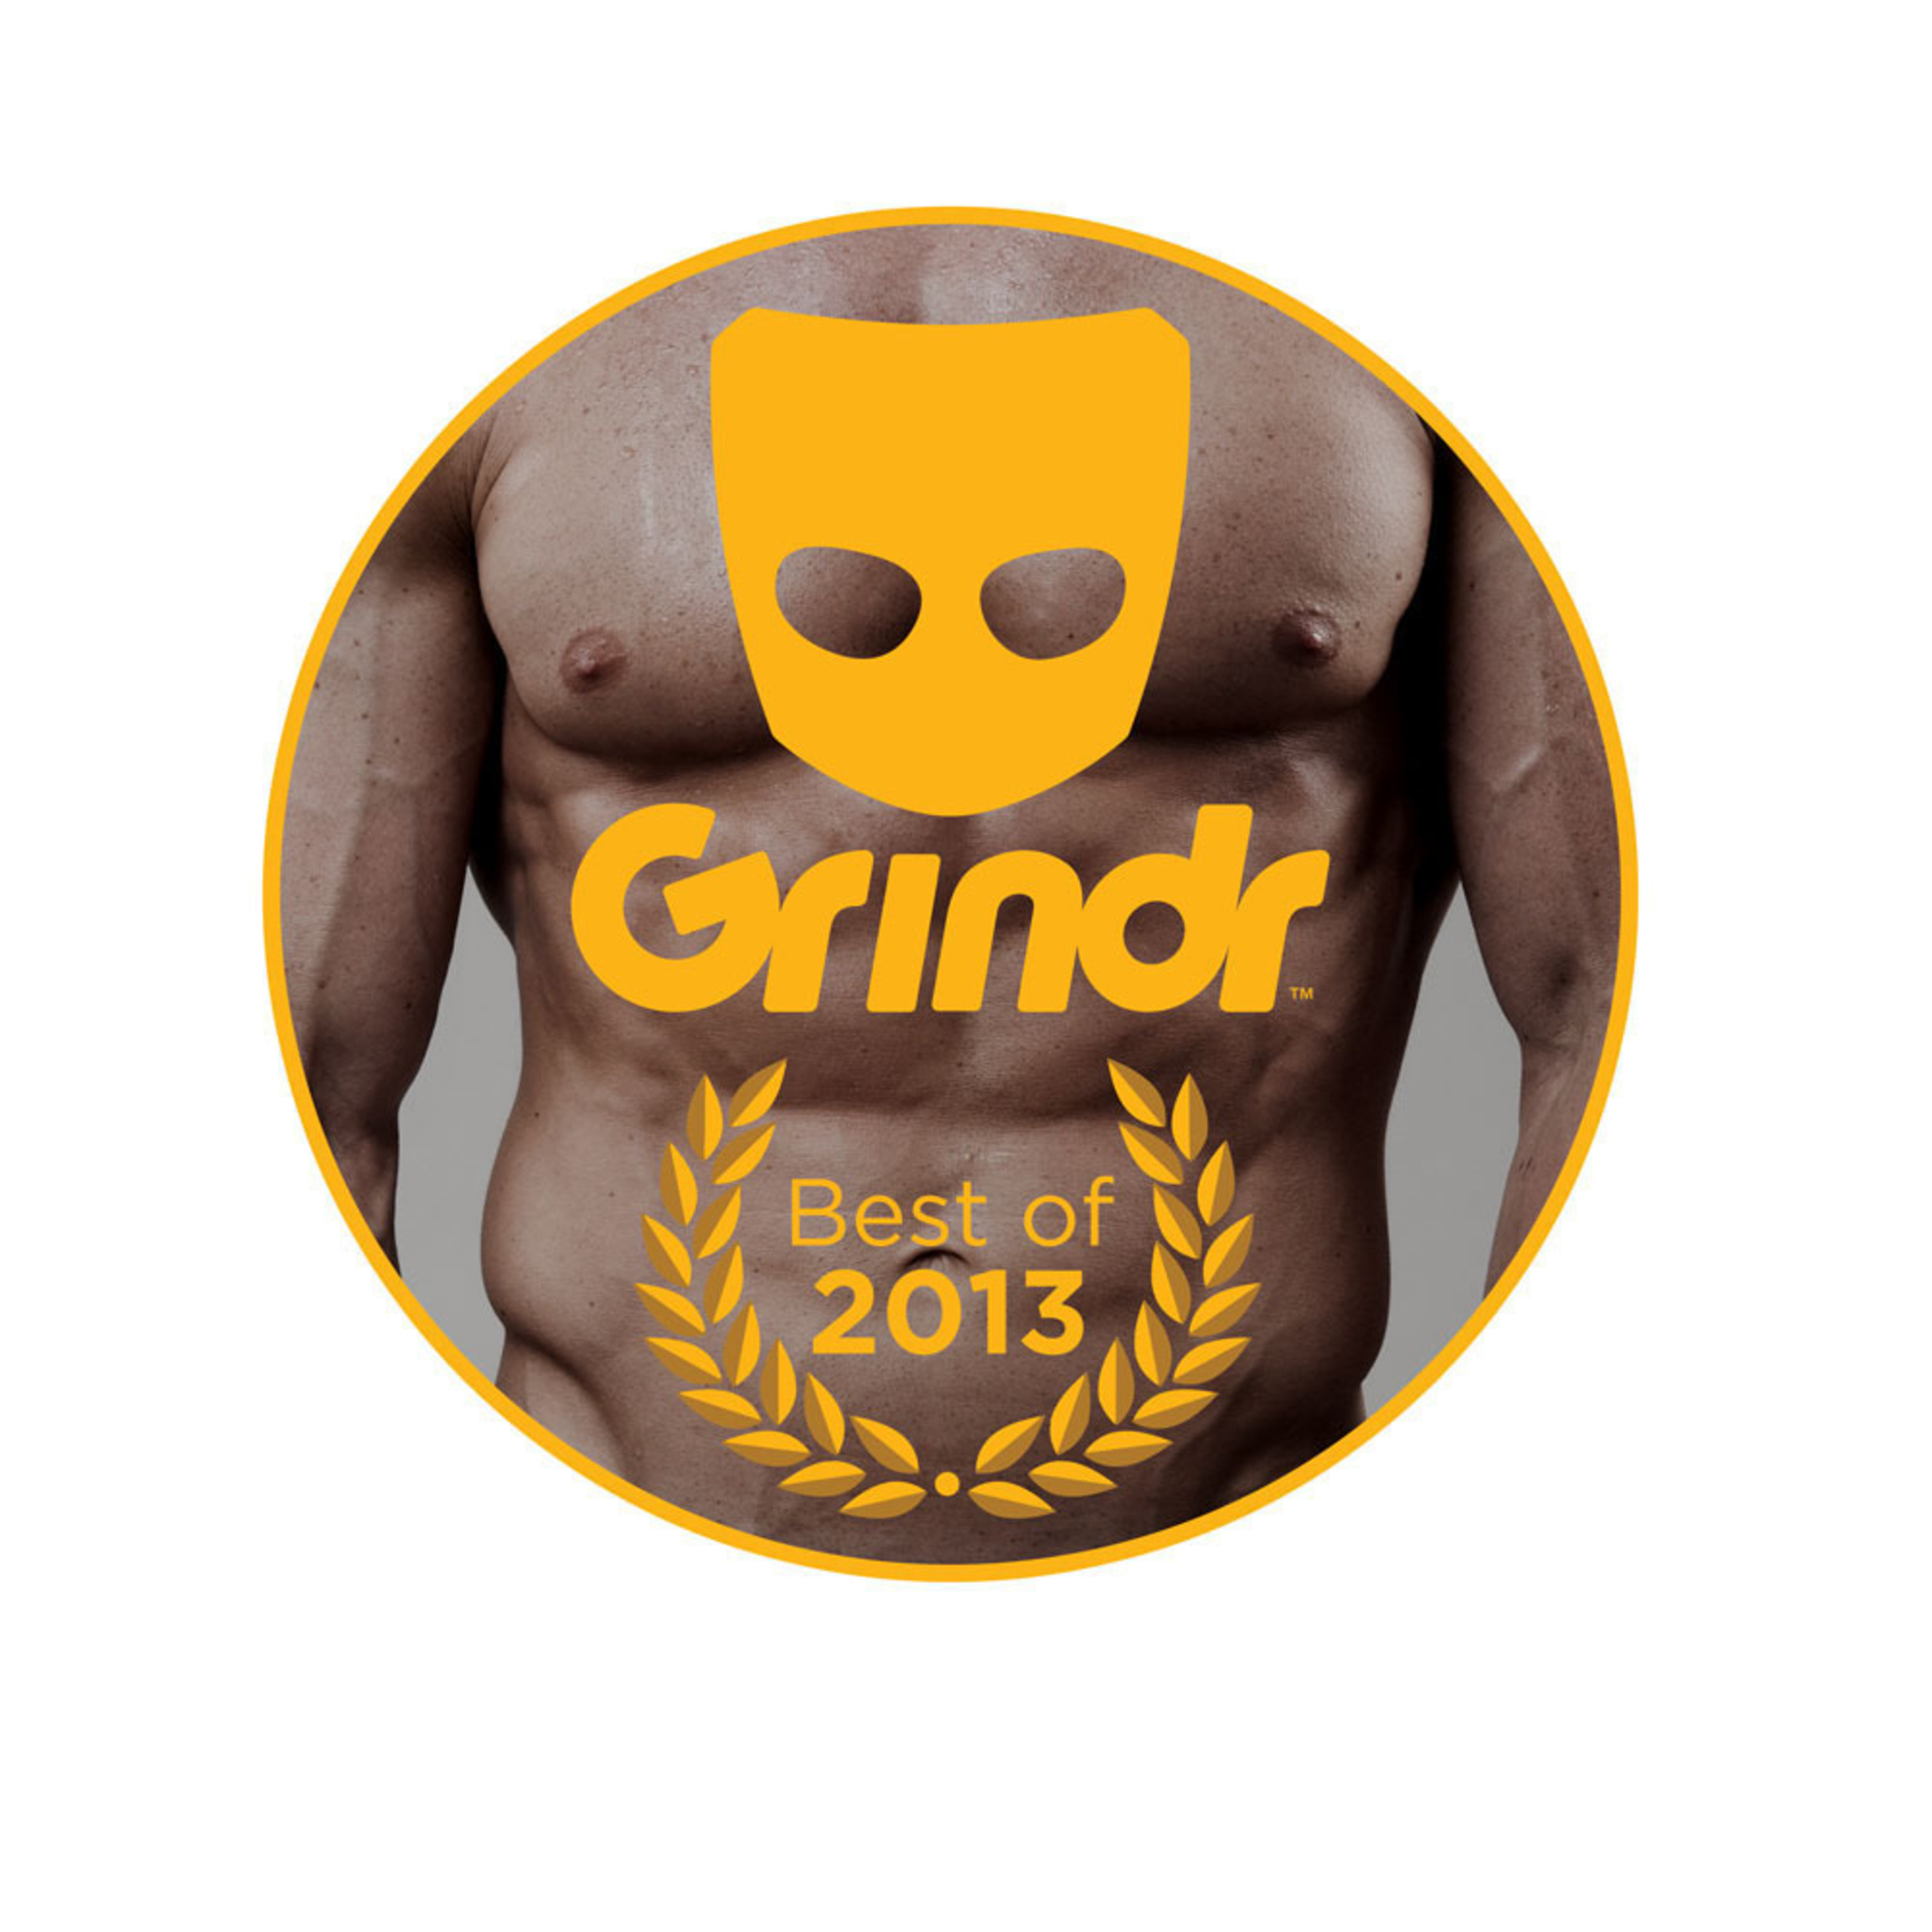 Grindr Releases Best of 2013 Awards, Revealing the Year's Top Gay Icons and Trends and Predictions for 2014. (PRNewsFoto/Grindr) (PRNewsFoto/GRINDR)